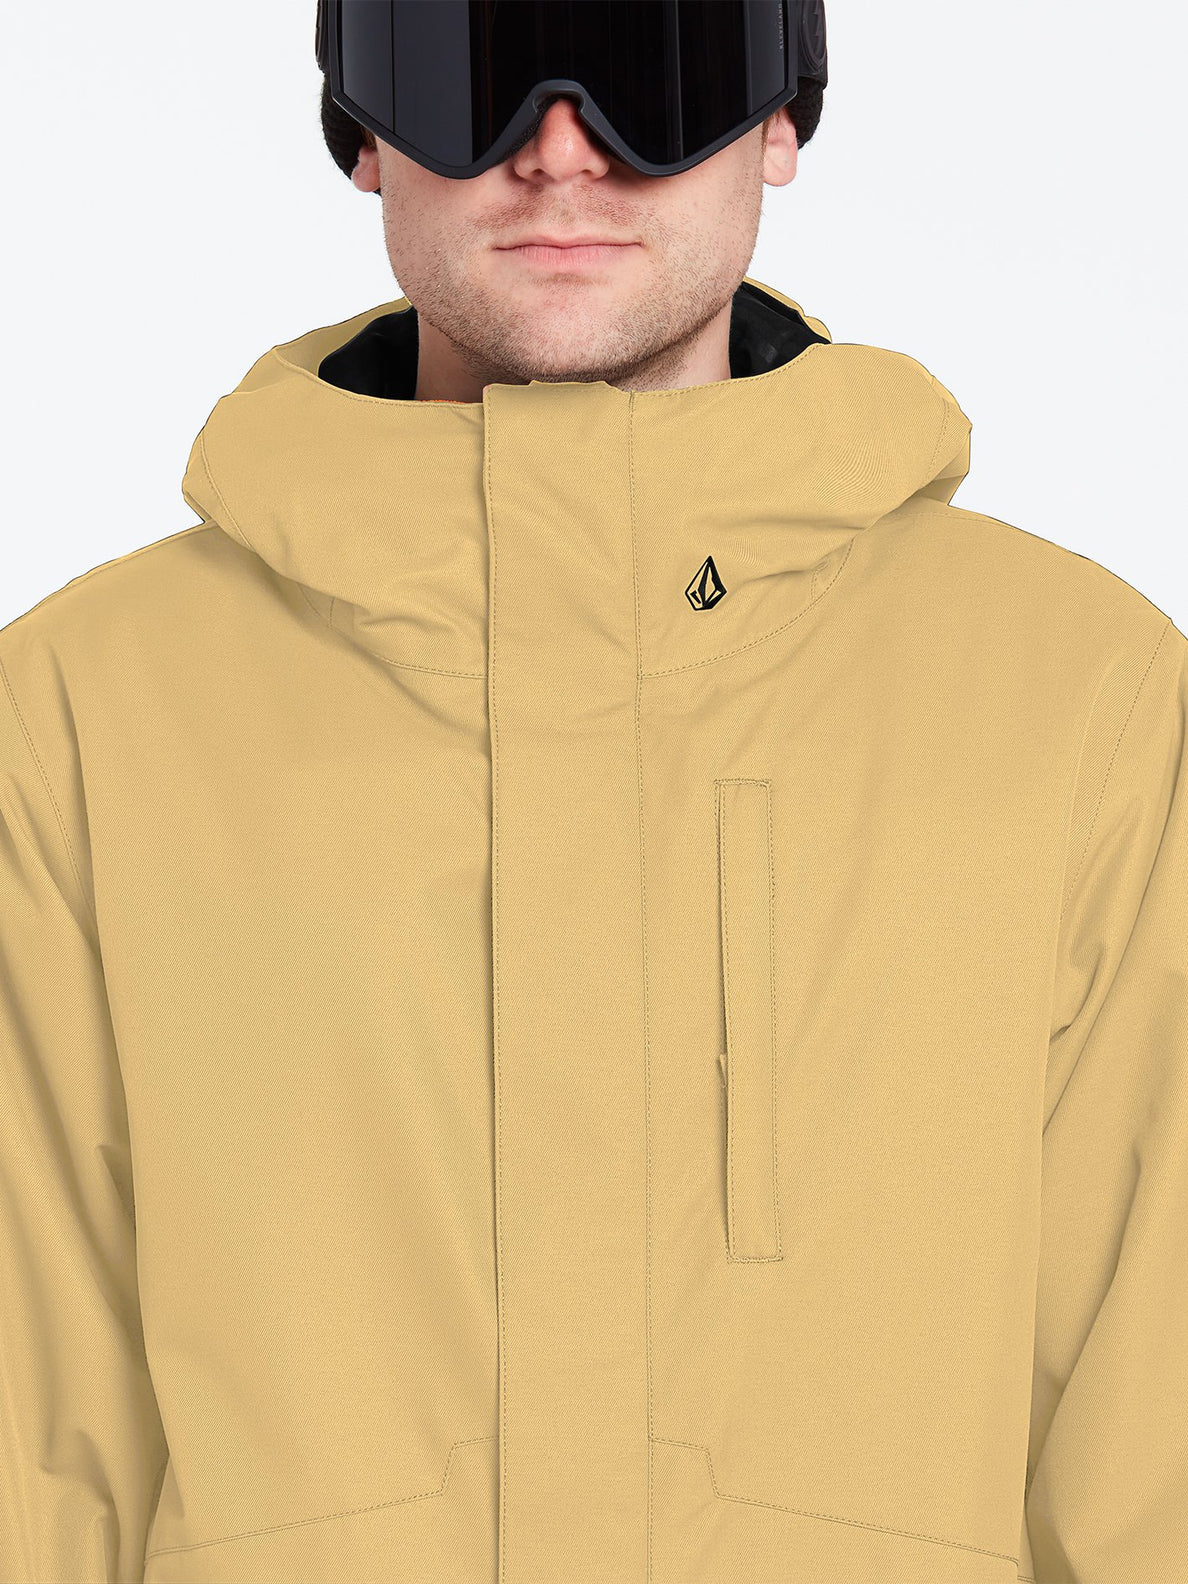 17Forty Insulated Jacket - GOLD (G0452114_GLD) [2]